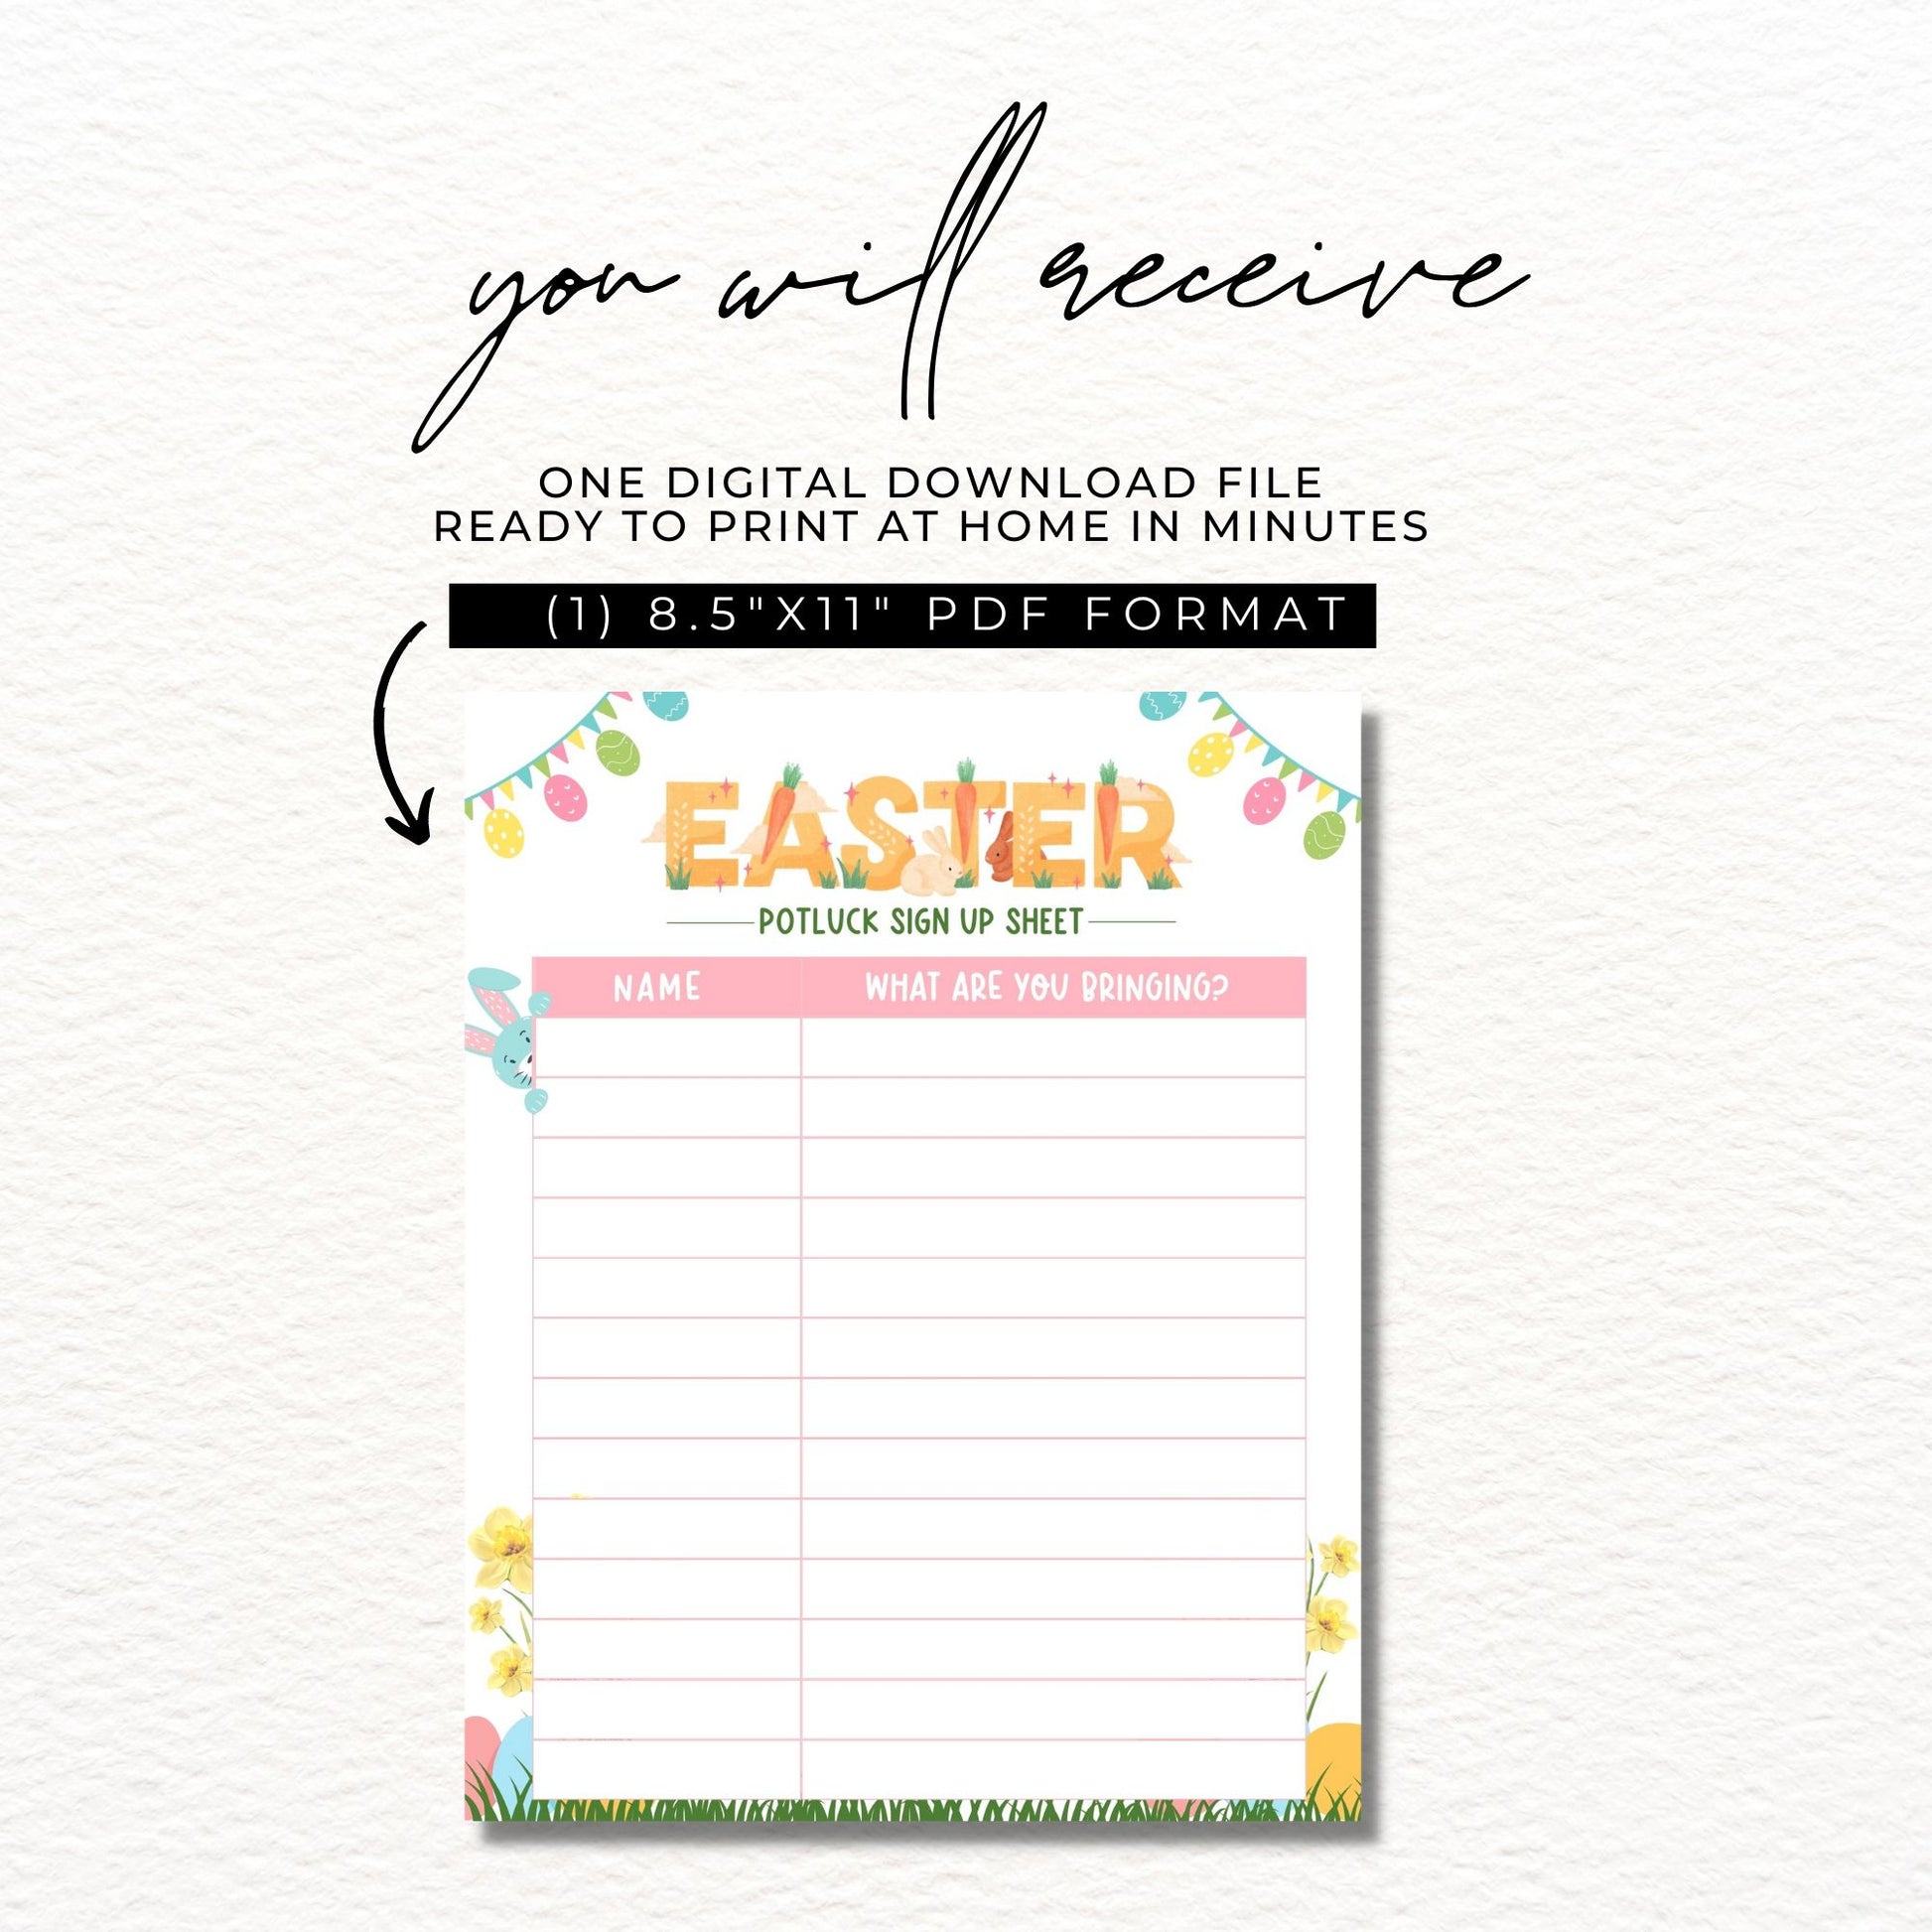 Easter Party Potluck Sign Up Sheet 8.5x11